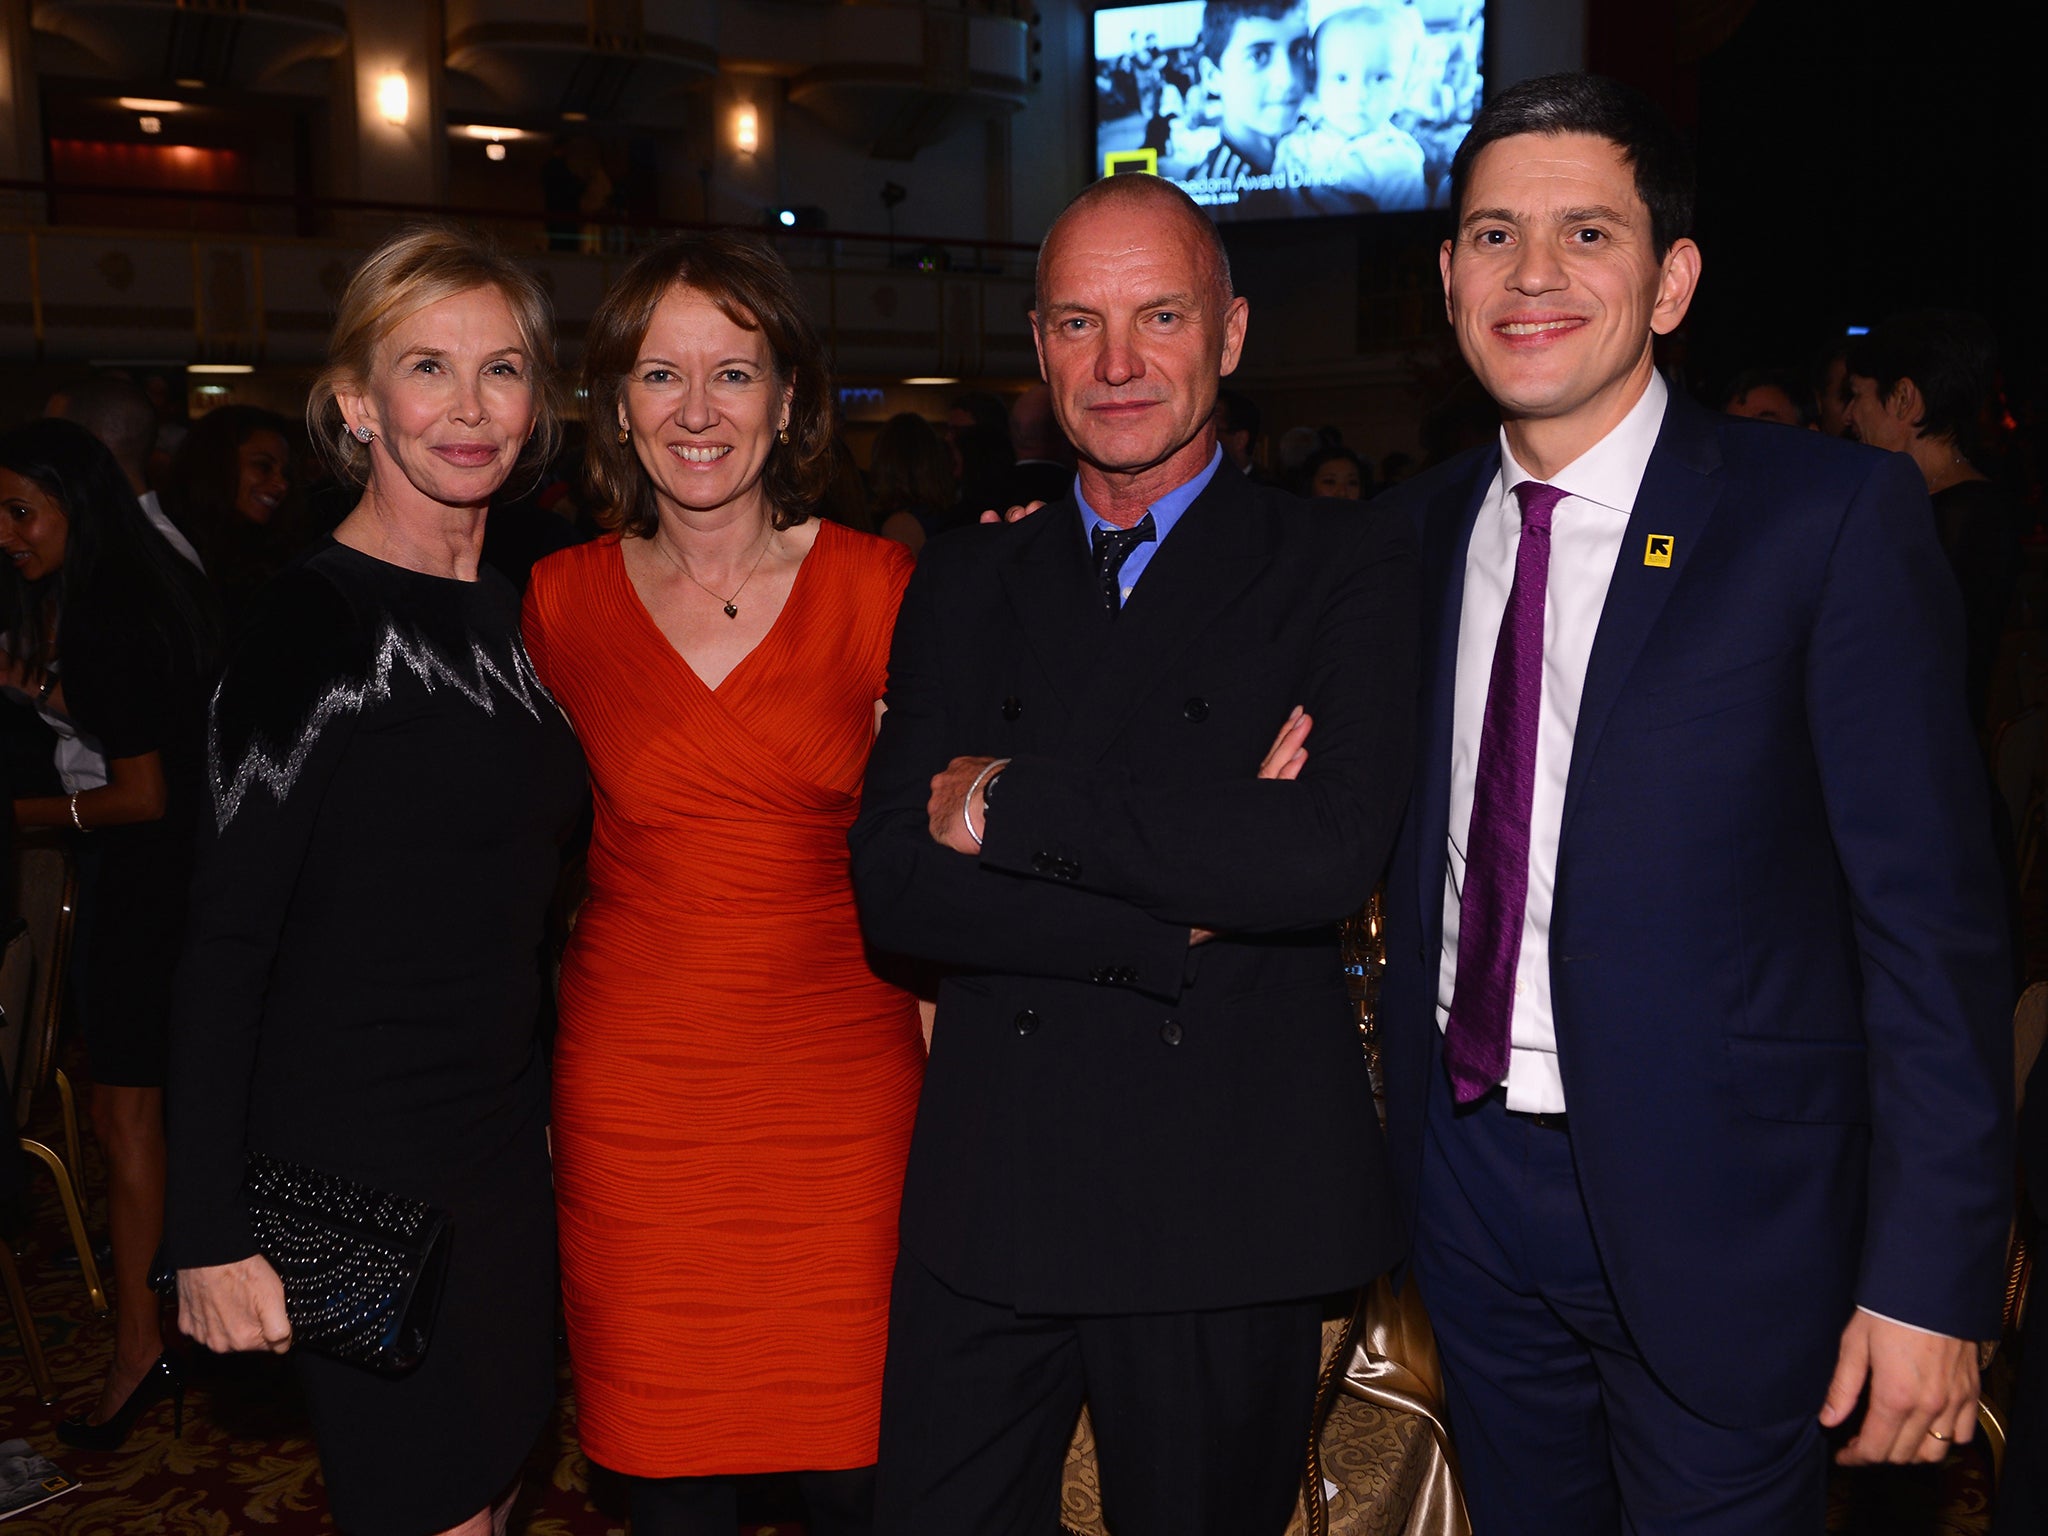 David Miliband (right) with (from left) Trudie Styler, his wife Louise Shackelton, and Sting at a benefit hosted by International Rescue Committee earlier this month